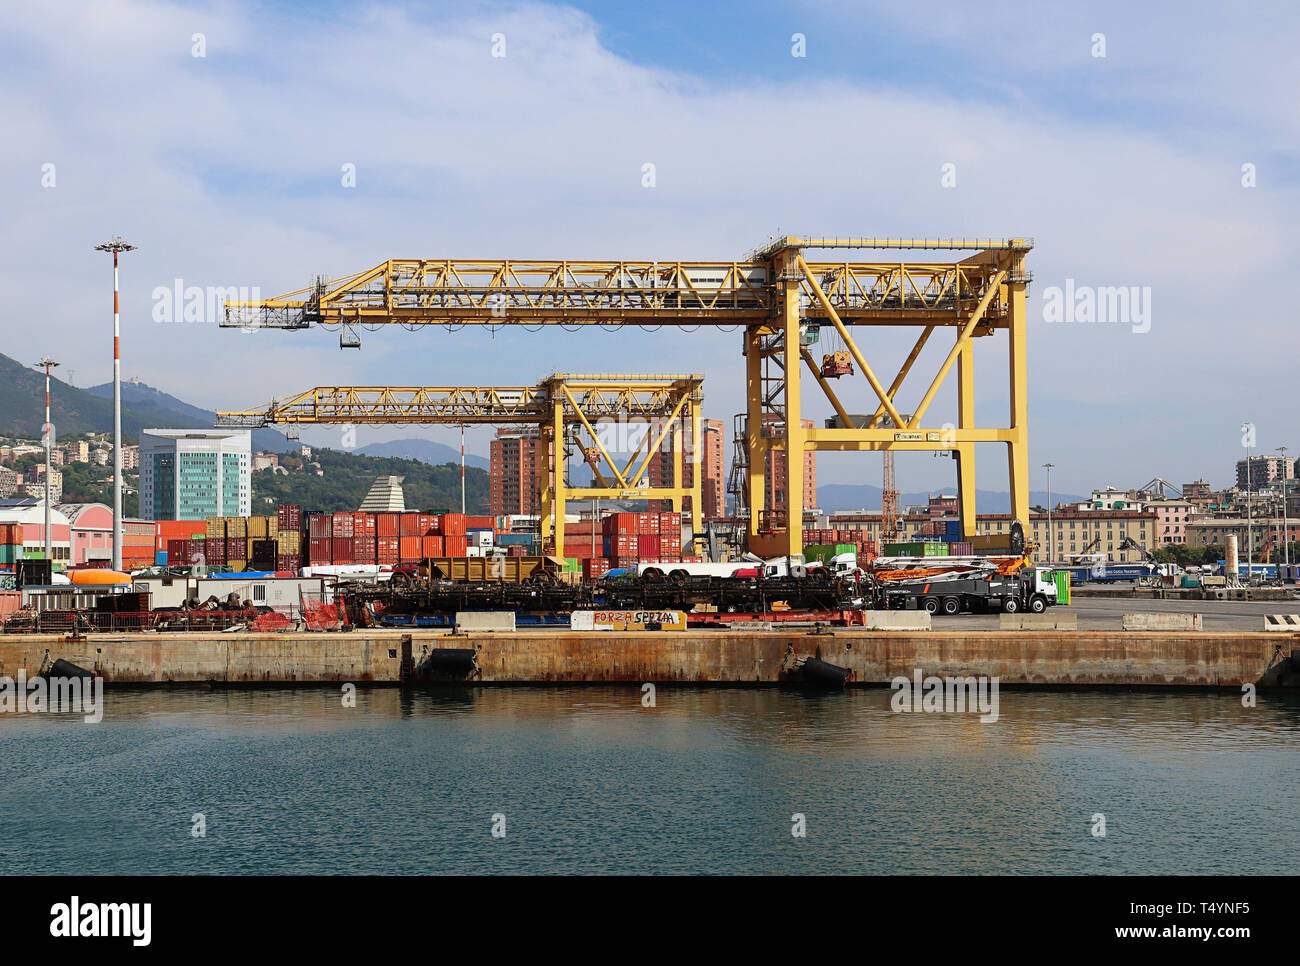 GENOA, ITALY - Cranes and the container terminal of the Genoa harbor Stock Photo